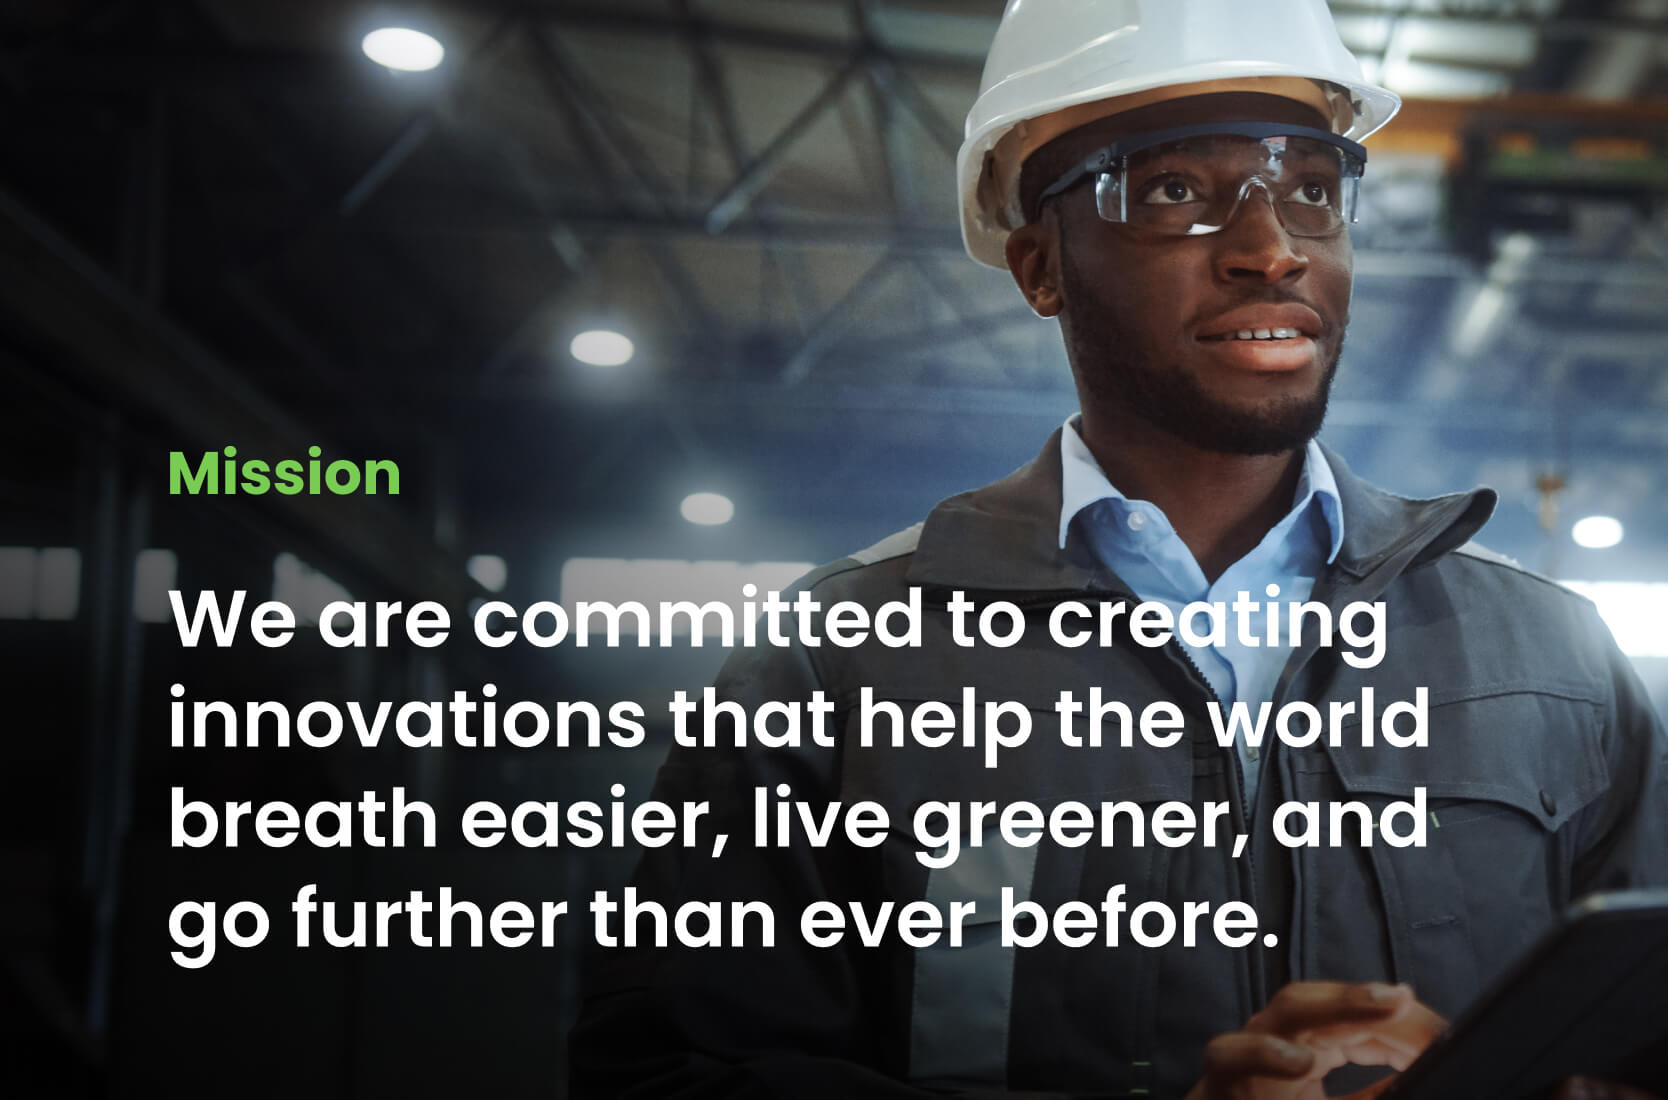 Alkegen Mission: We are committed to creating innovations that help the world breath easier, live greener, and go further than ever before.